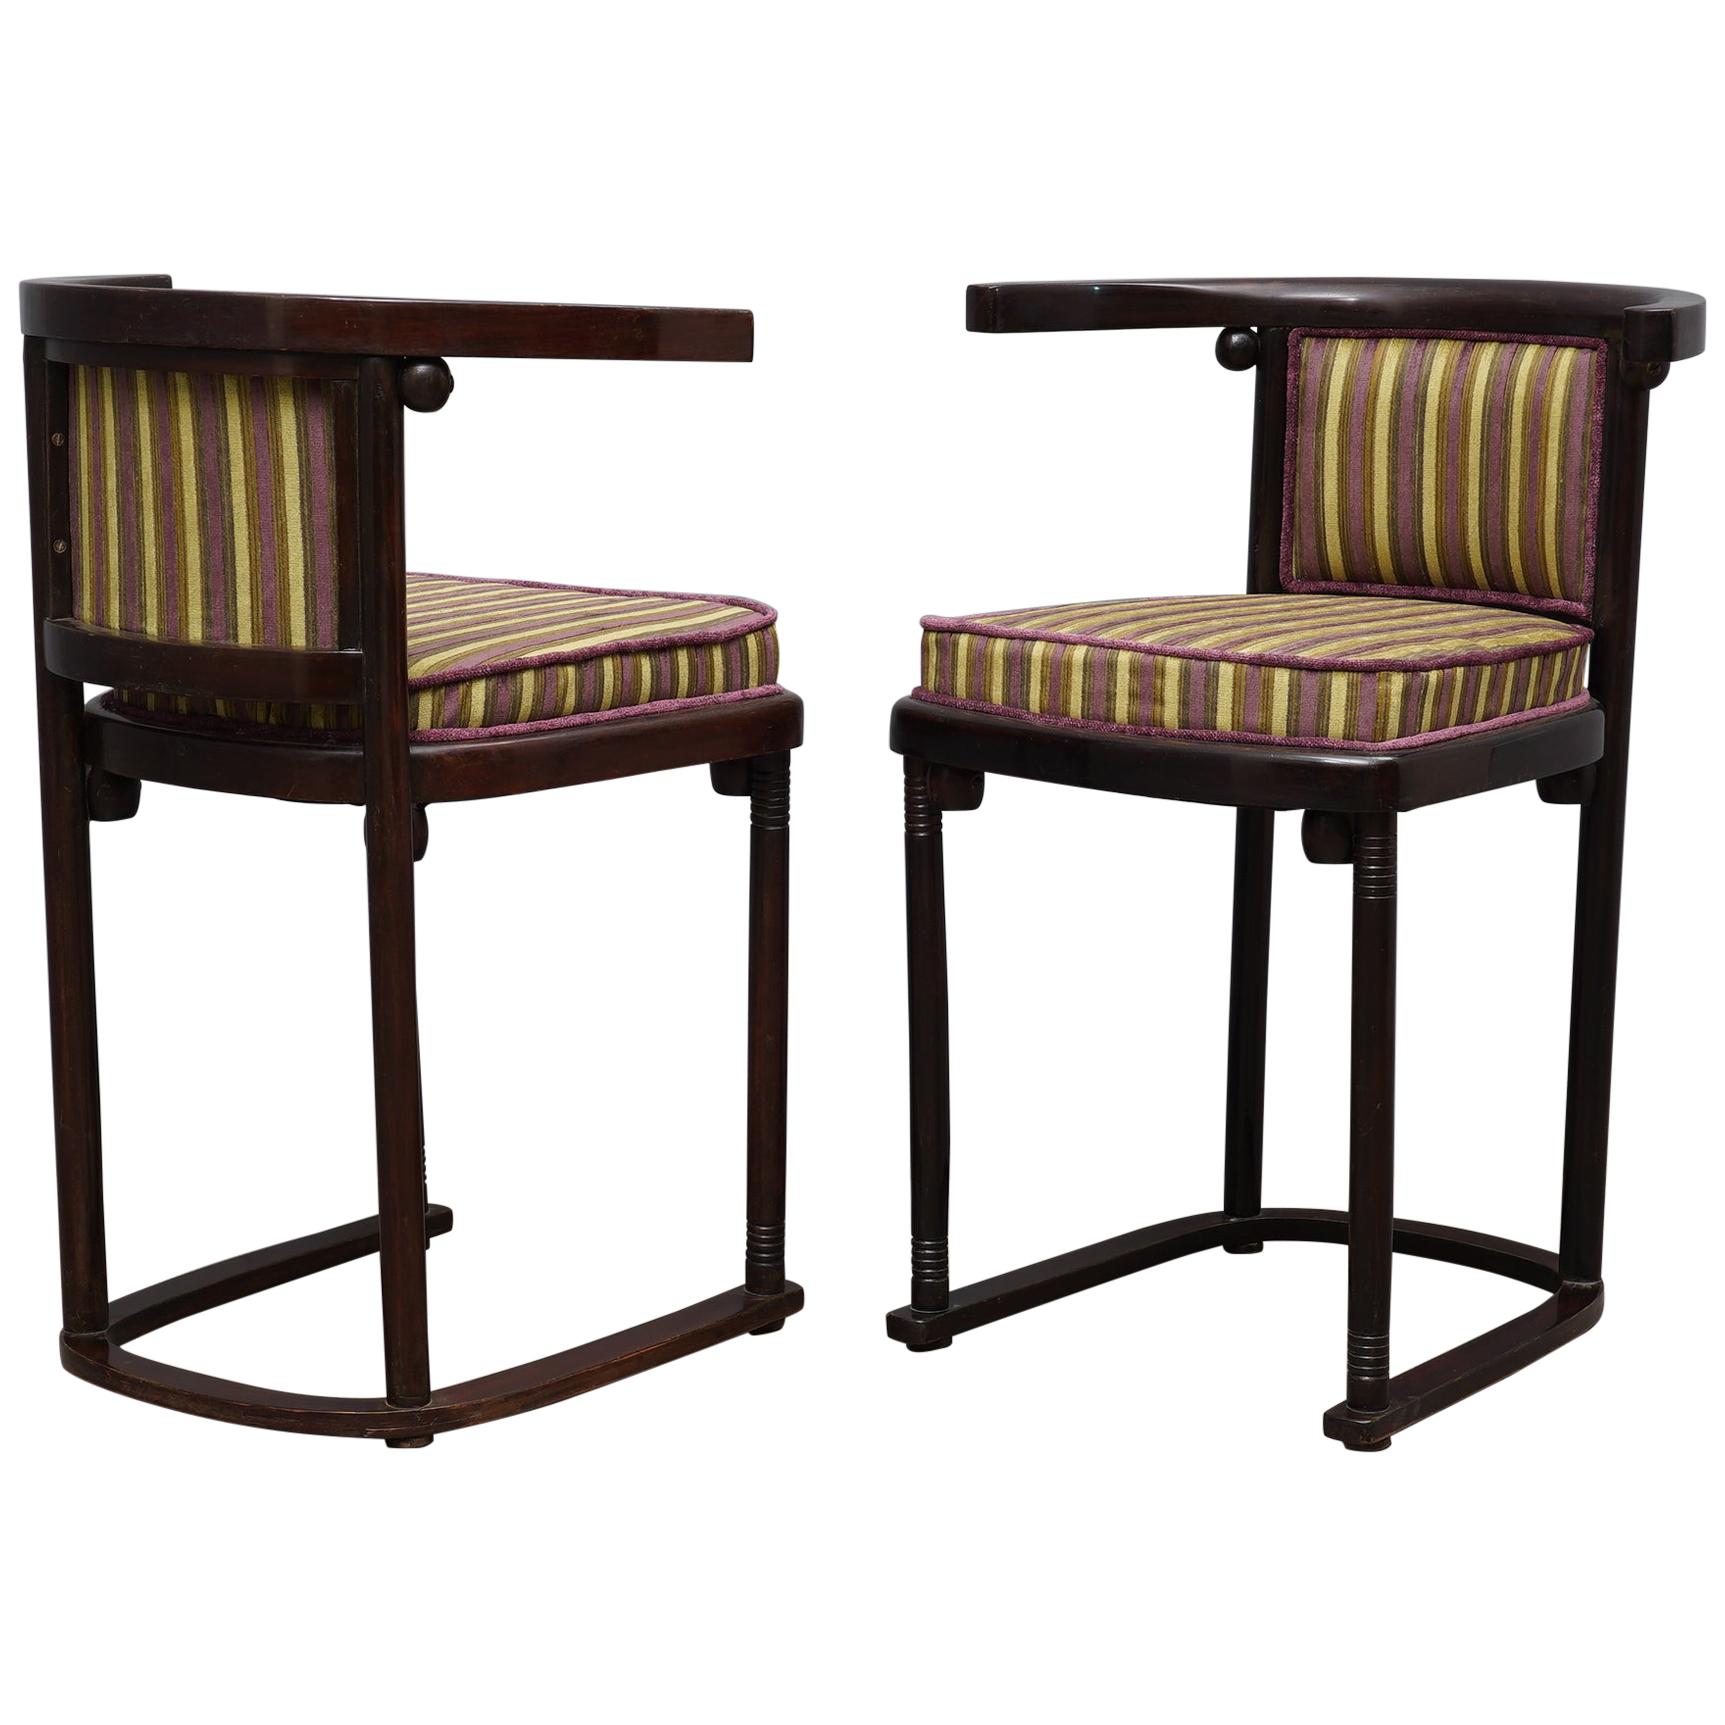 Pair of Art Nouveau Beech Wood and Striped Velvet Austrian Chairs, 1910 For Sale